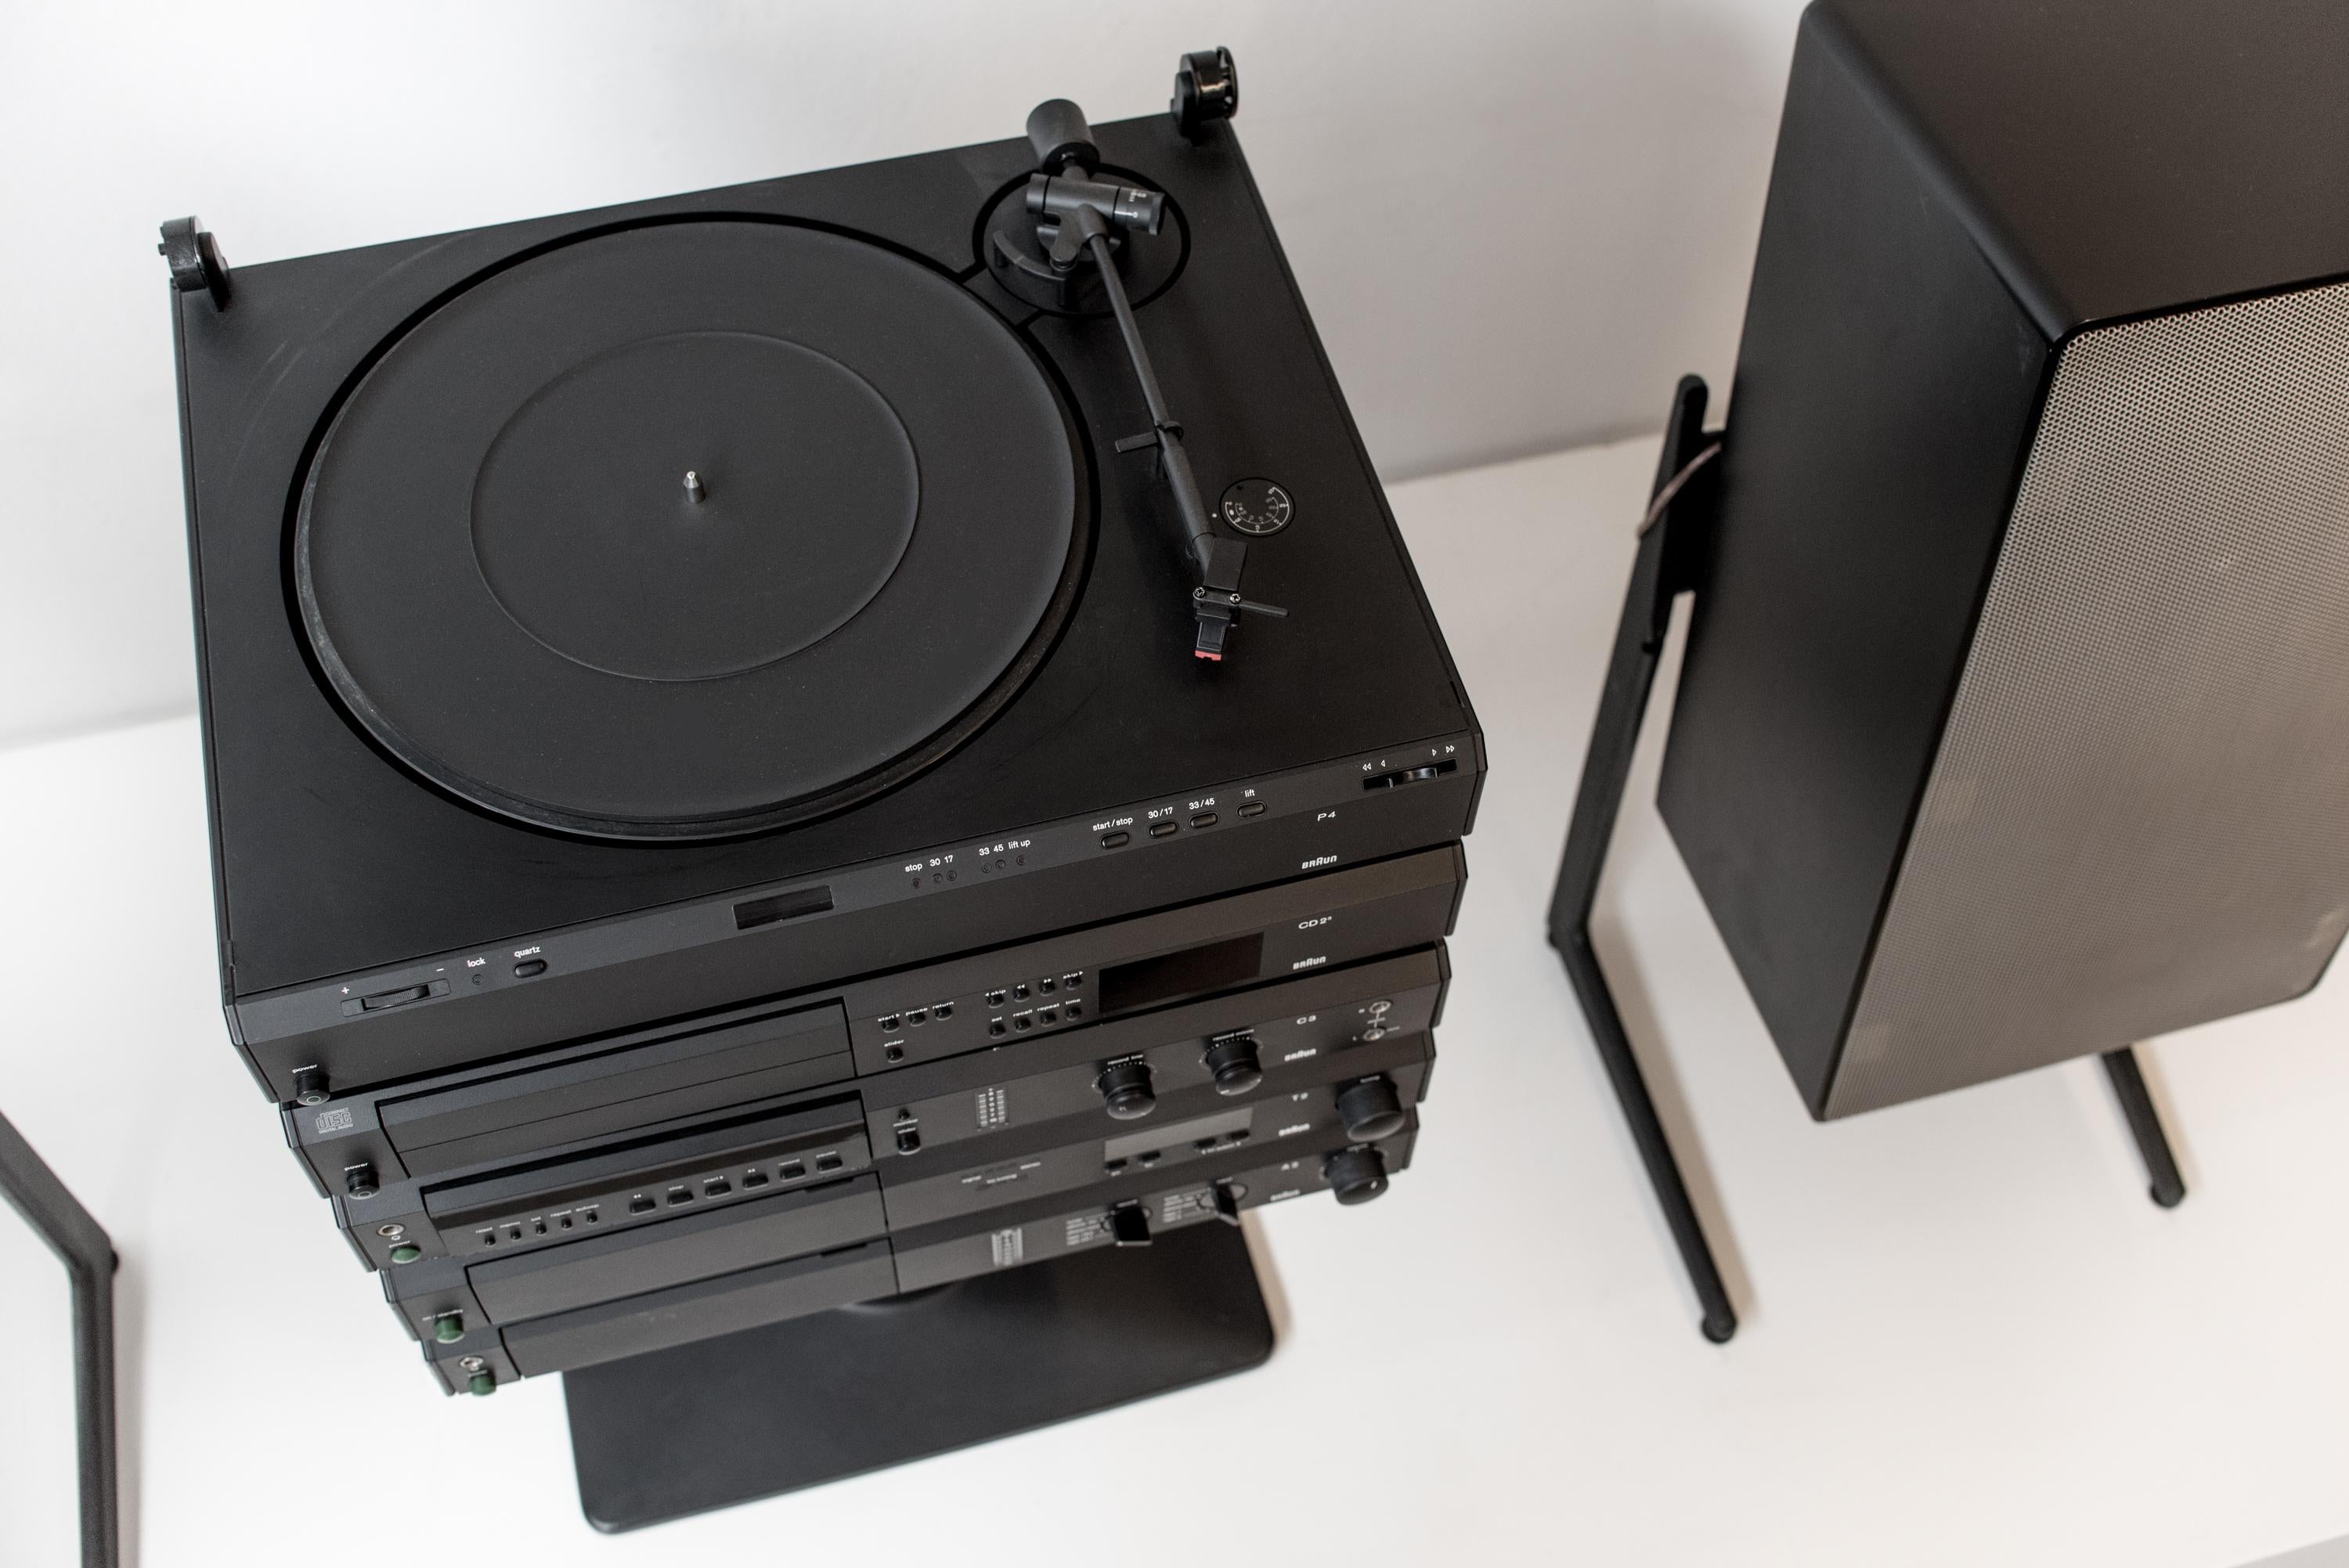 Complete Atelier 3 Braun HiFi stereo-system designed by Dieter Rams. Turntable P1 with cart, Amplifier A1, CD2/3 and with original Stand AF1. Decks in black lacquered steel cover. Stand AF1 in black lacquered plastic with three internal sockets and